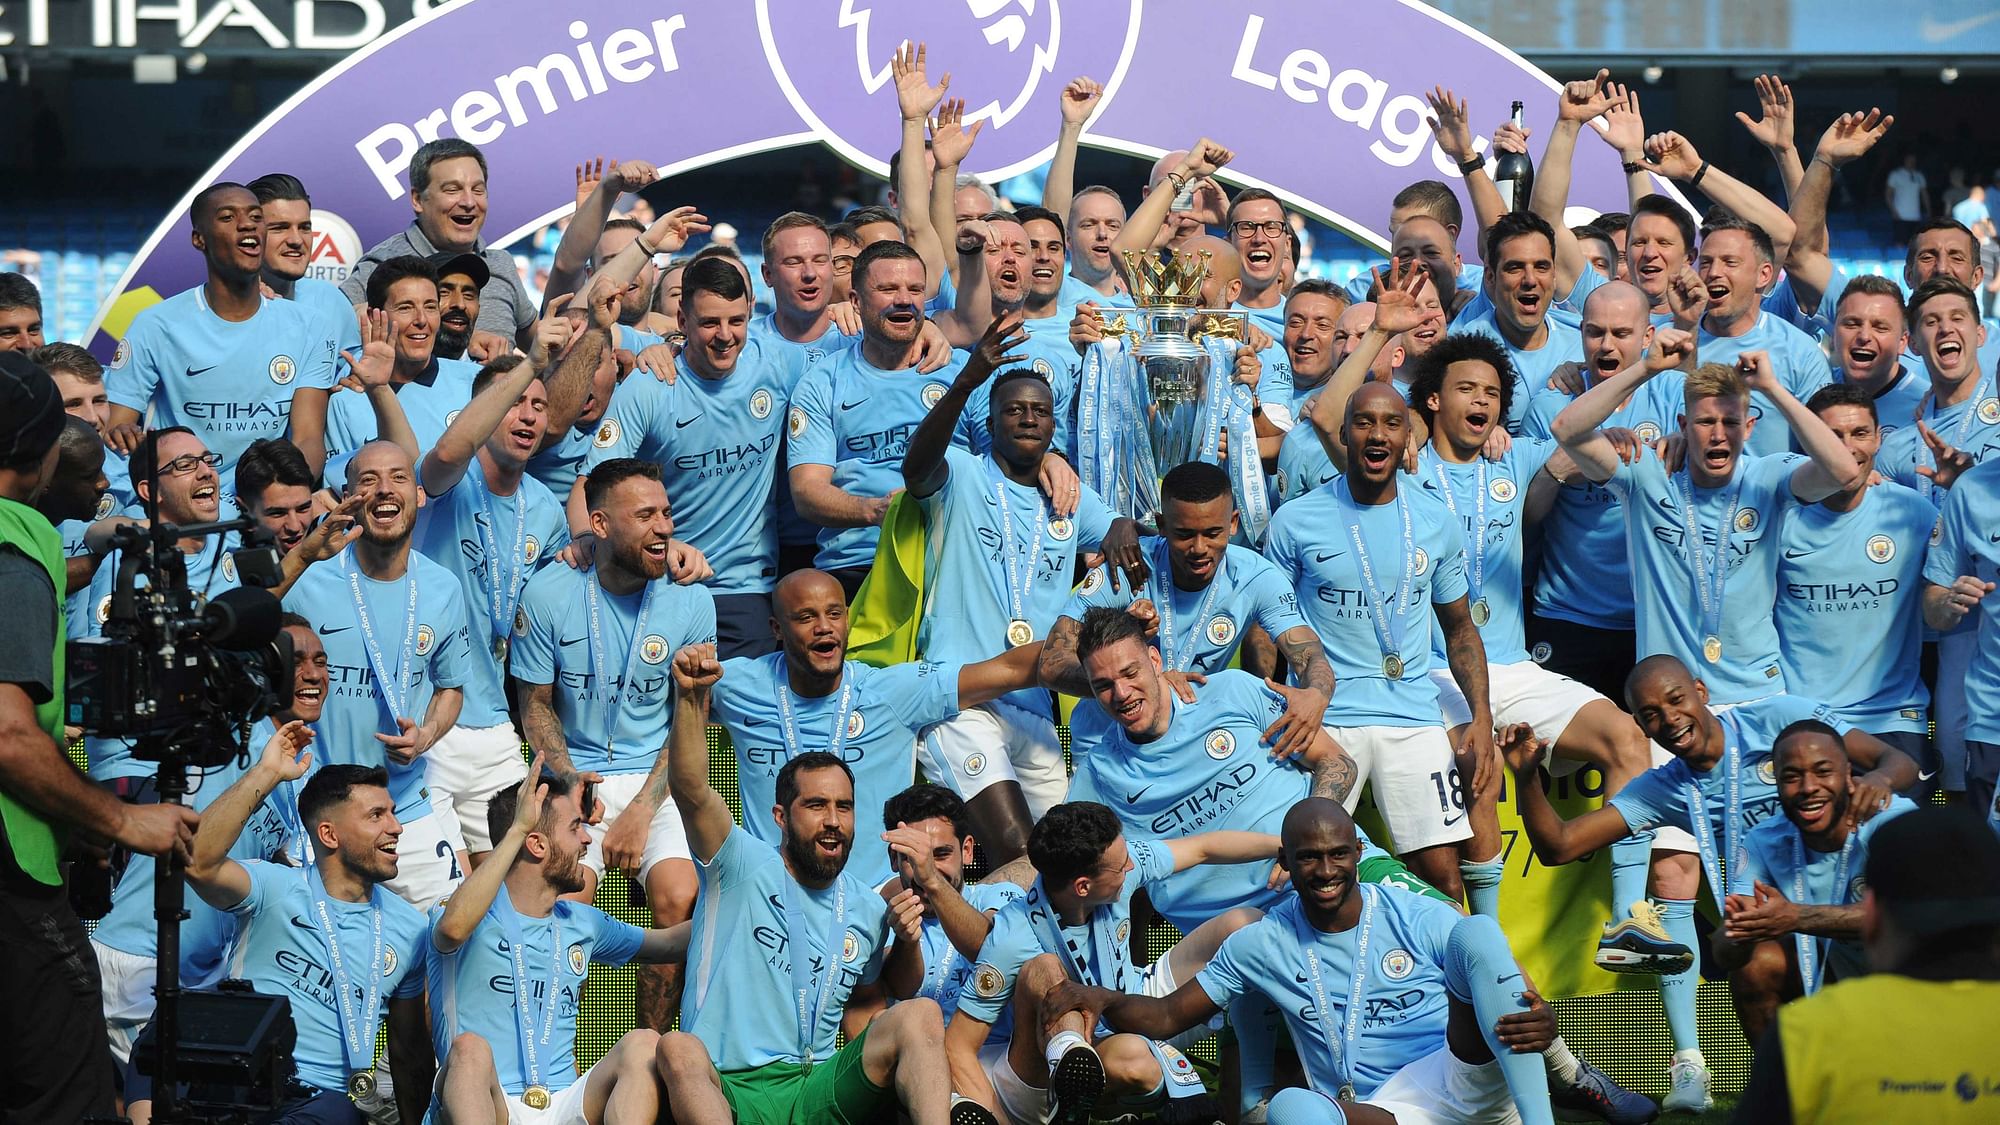 Manchester City players lift the English Premier League trophy after the soccer match between Manchester City and Huddersfield Town at Etihad stadium in Manchester, England, Sunday, May 6, 2018.